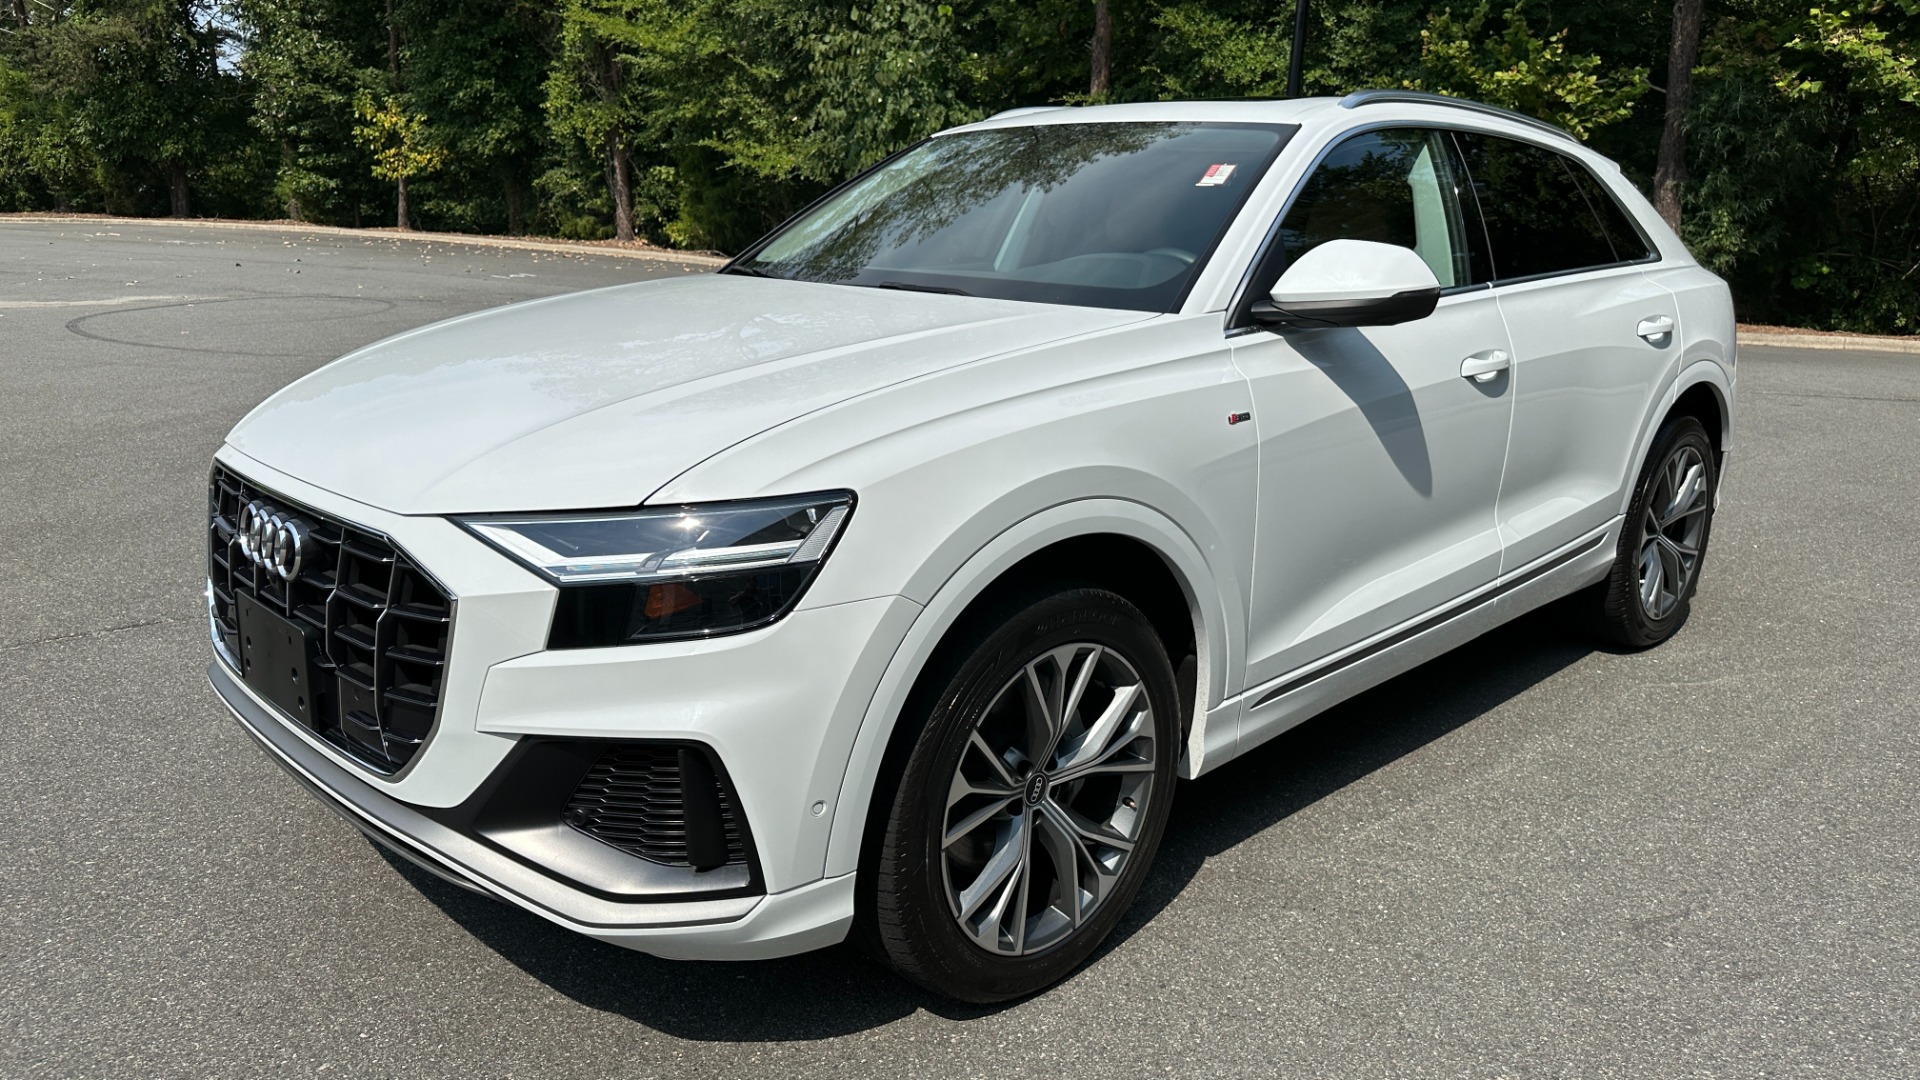 Used 2021 Audi Q8 PREMIUM PLUS / S-LINE / TOW PACKAGE / REAR AIRBAGS for sale $60,995 at Formula Imports in Charlotte NC 28227 2